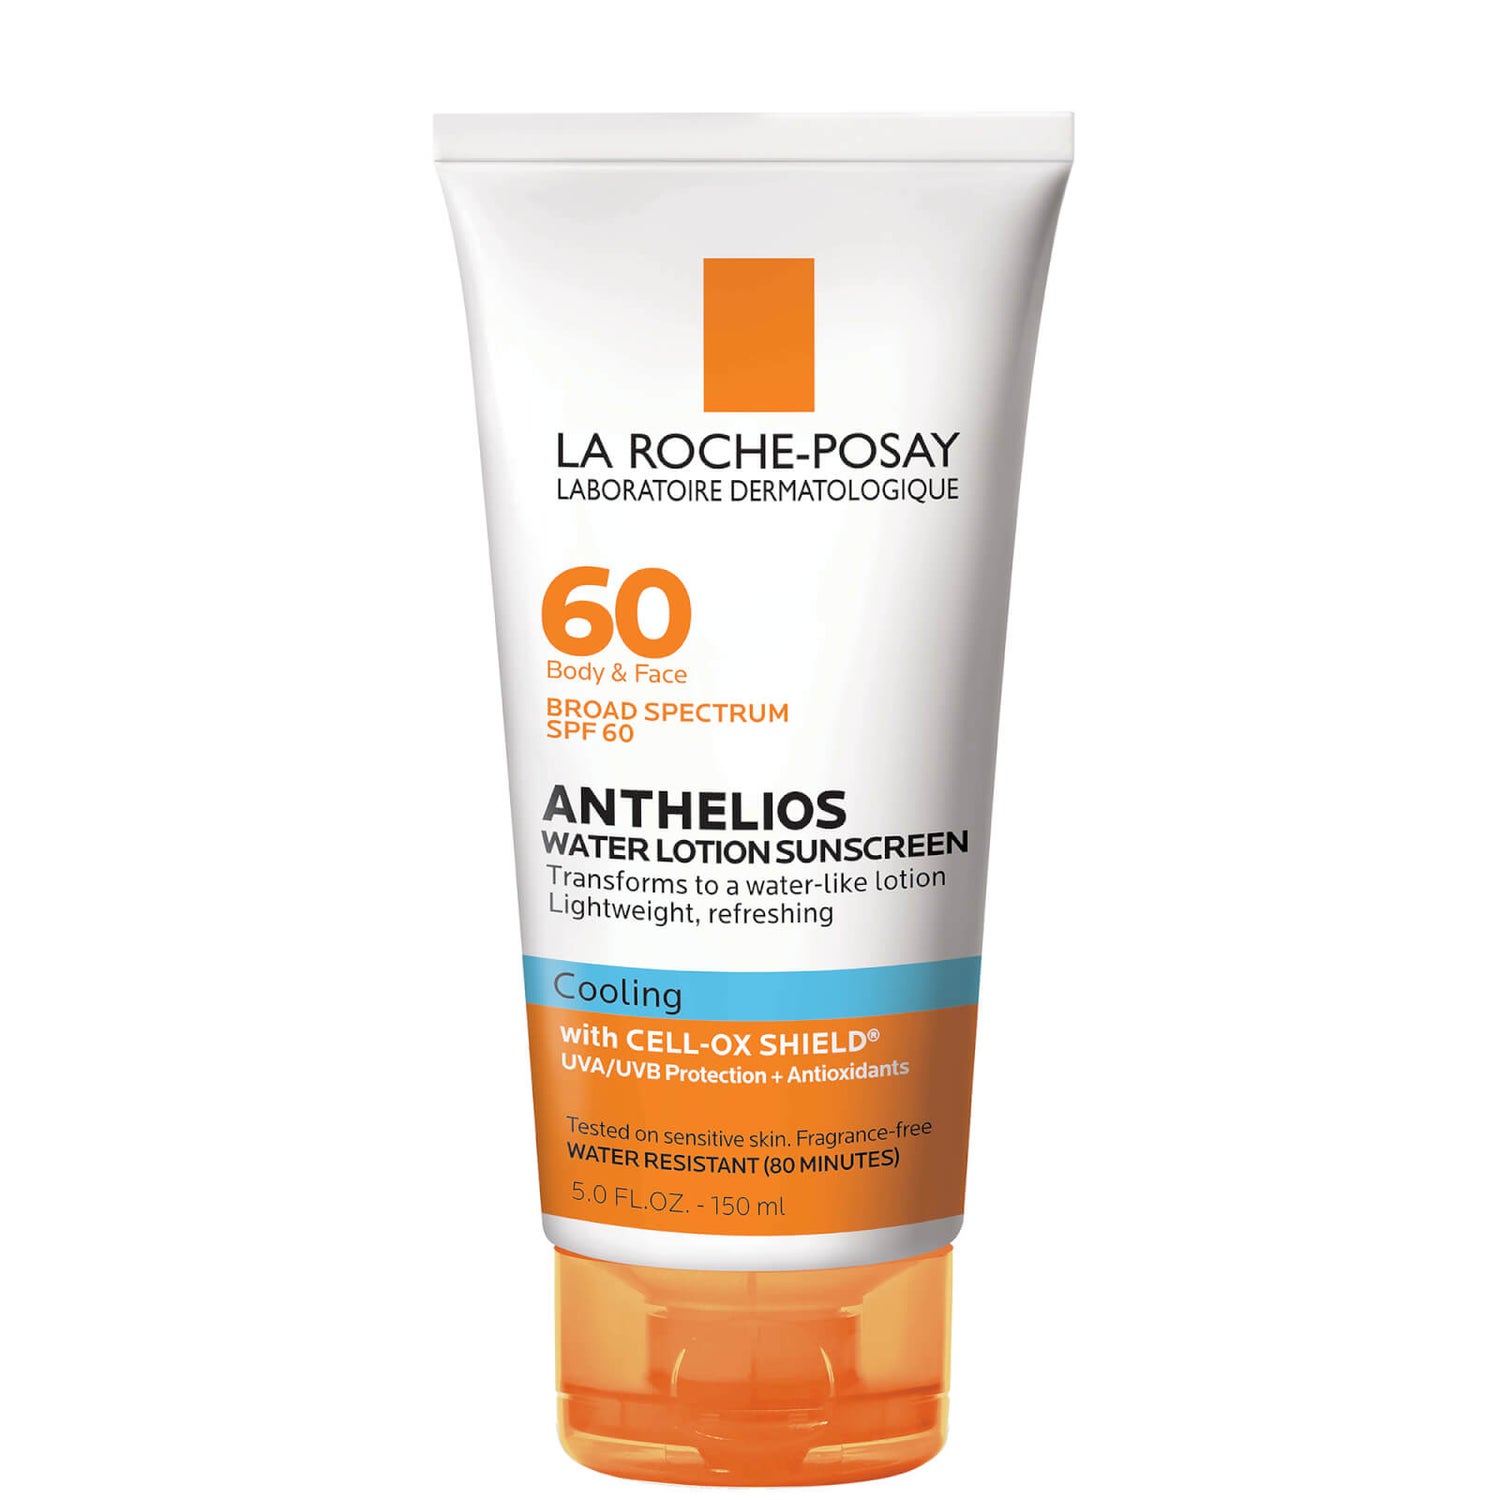 La Roche-Posay Anthelios 60 Cooling Water-Lotion Sunscreen (5 fl. oz.)